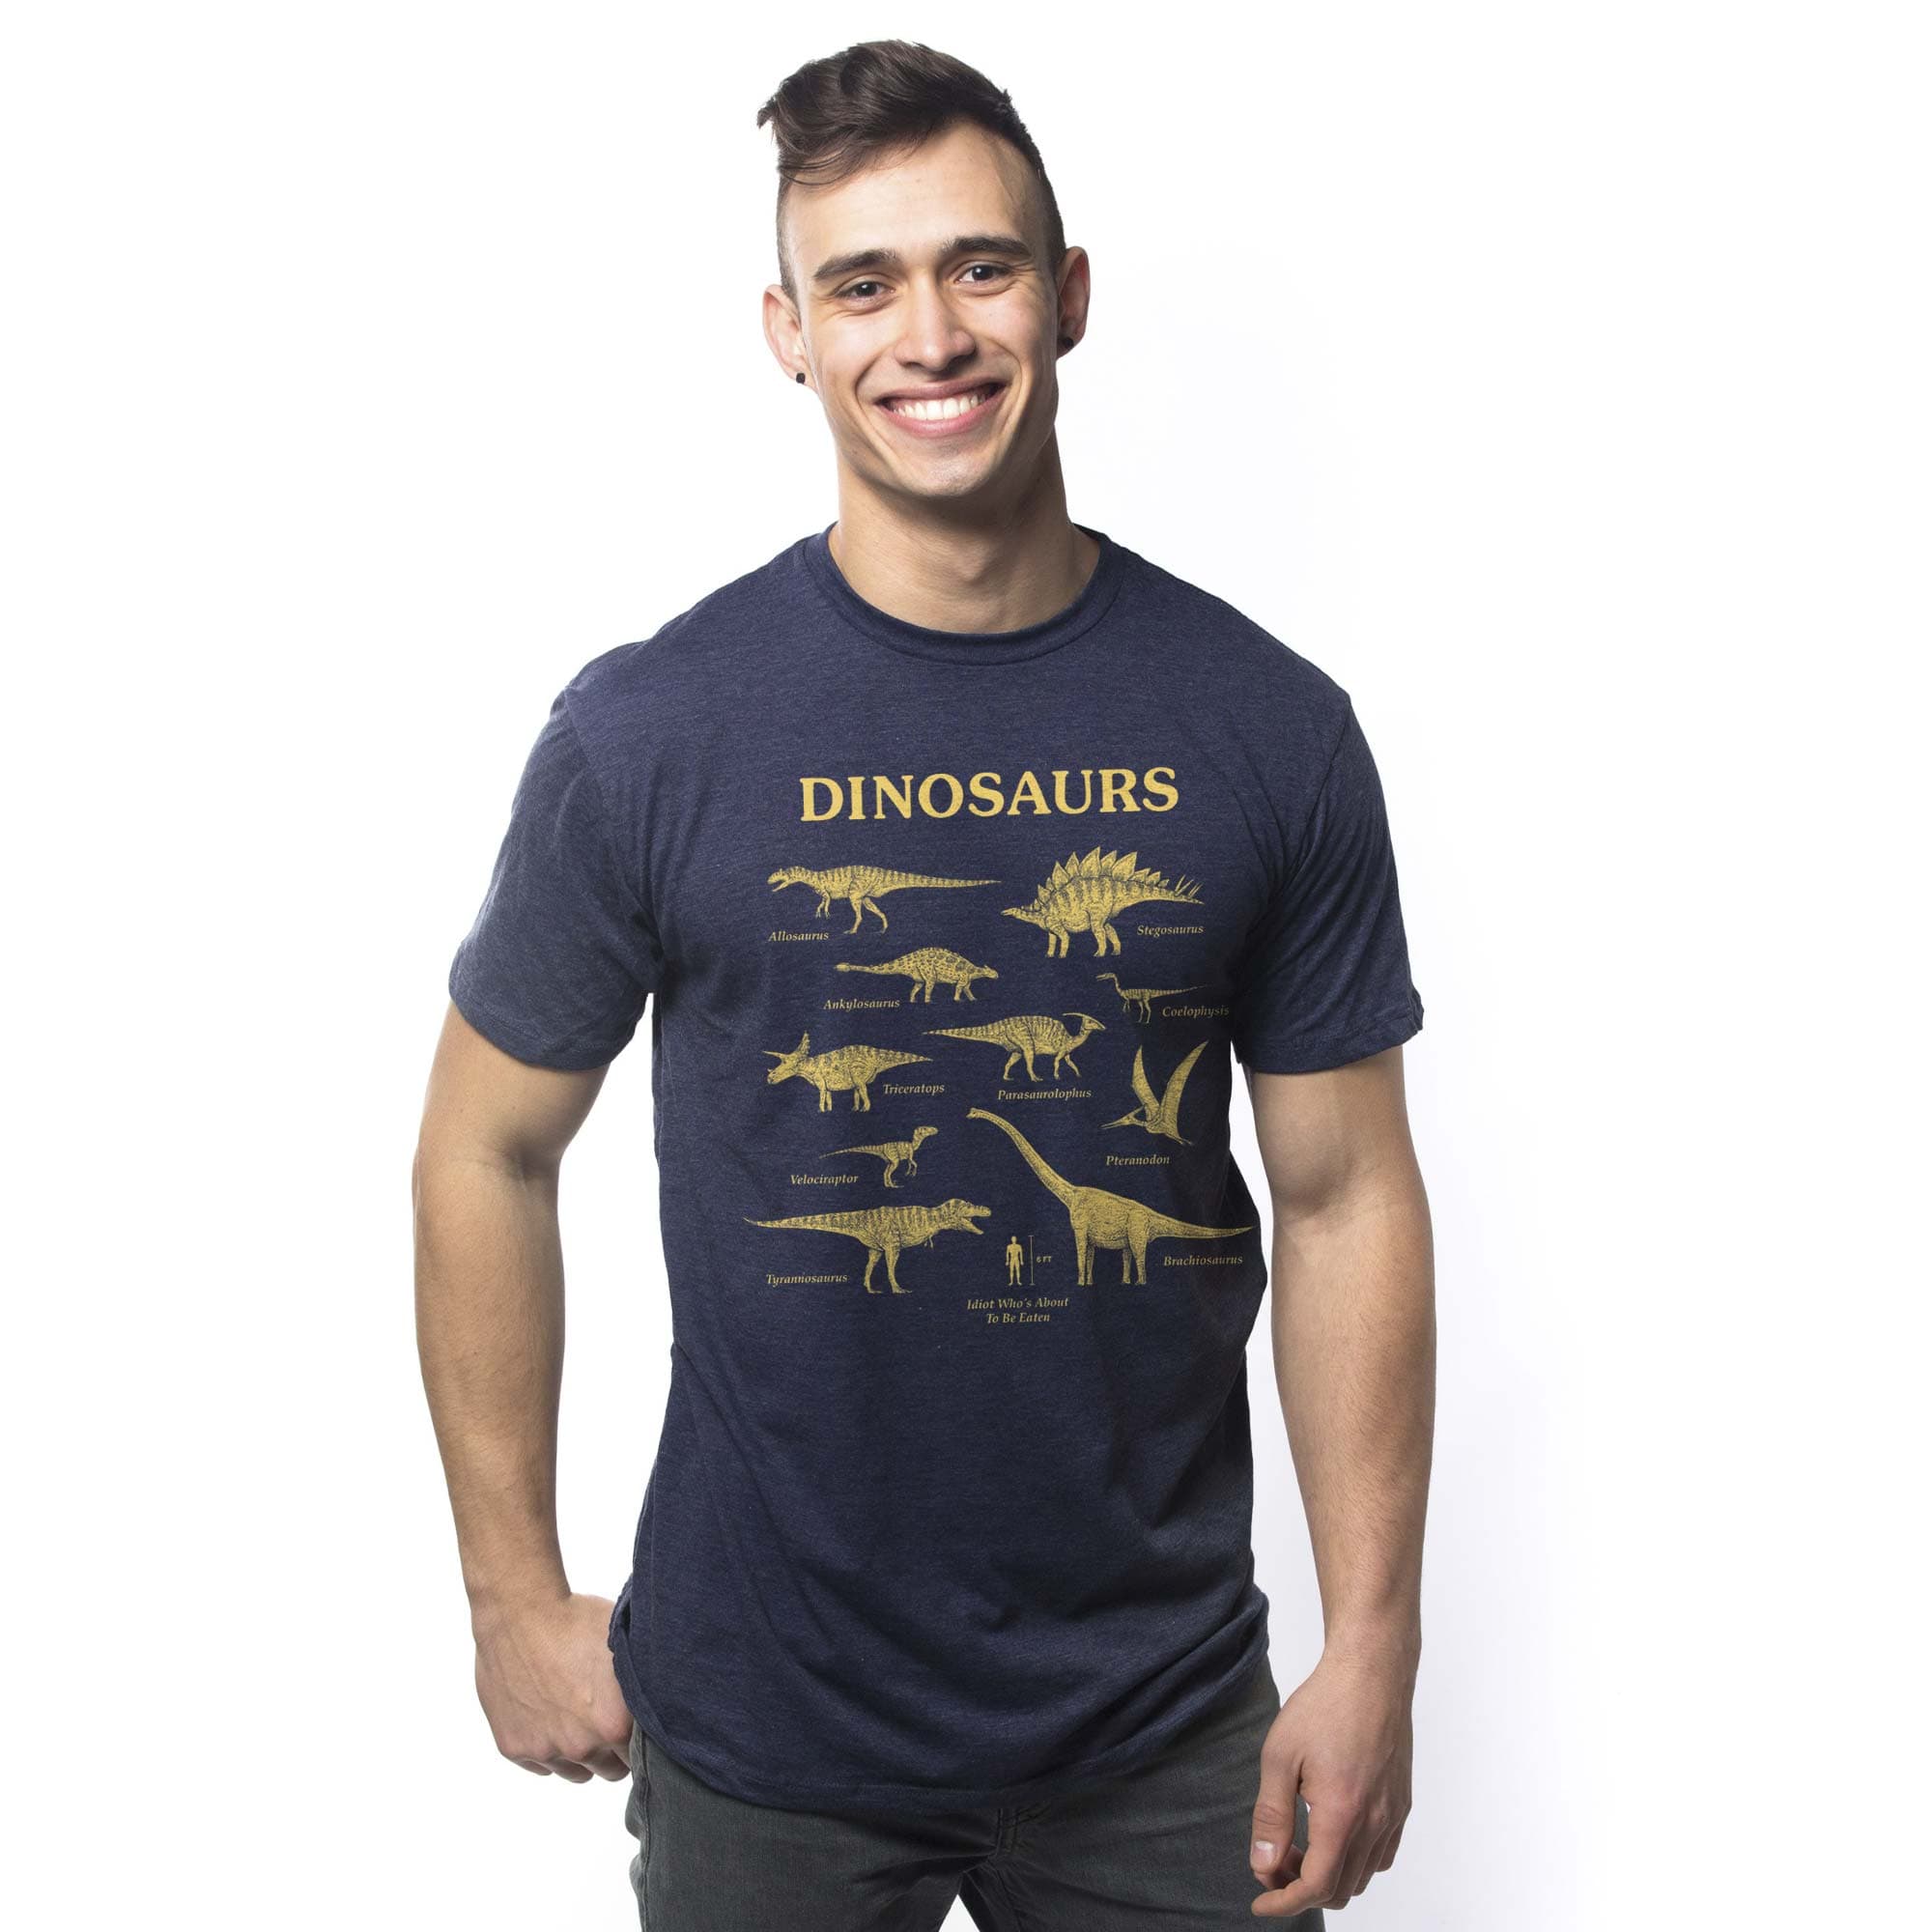 Men's Dinosaurs & Idiot Funny Nerdy Graphic T-Shirt | Cool Science Enthusiast Tee | Solid Threads